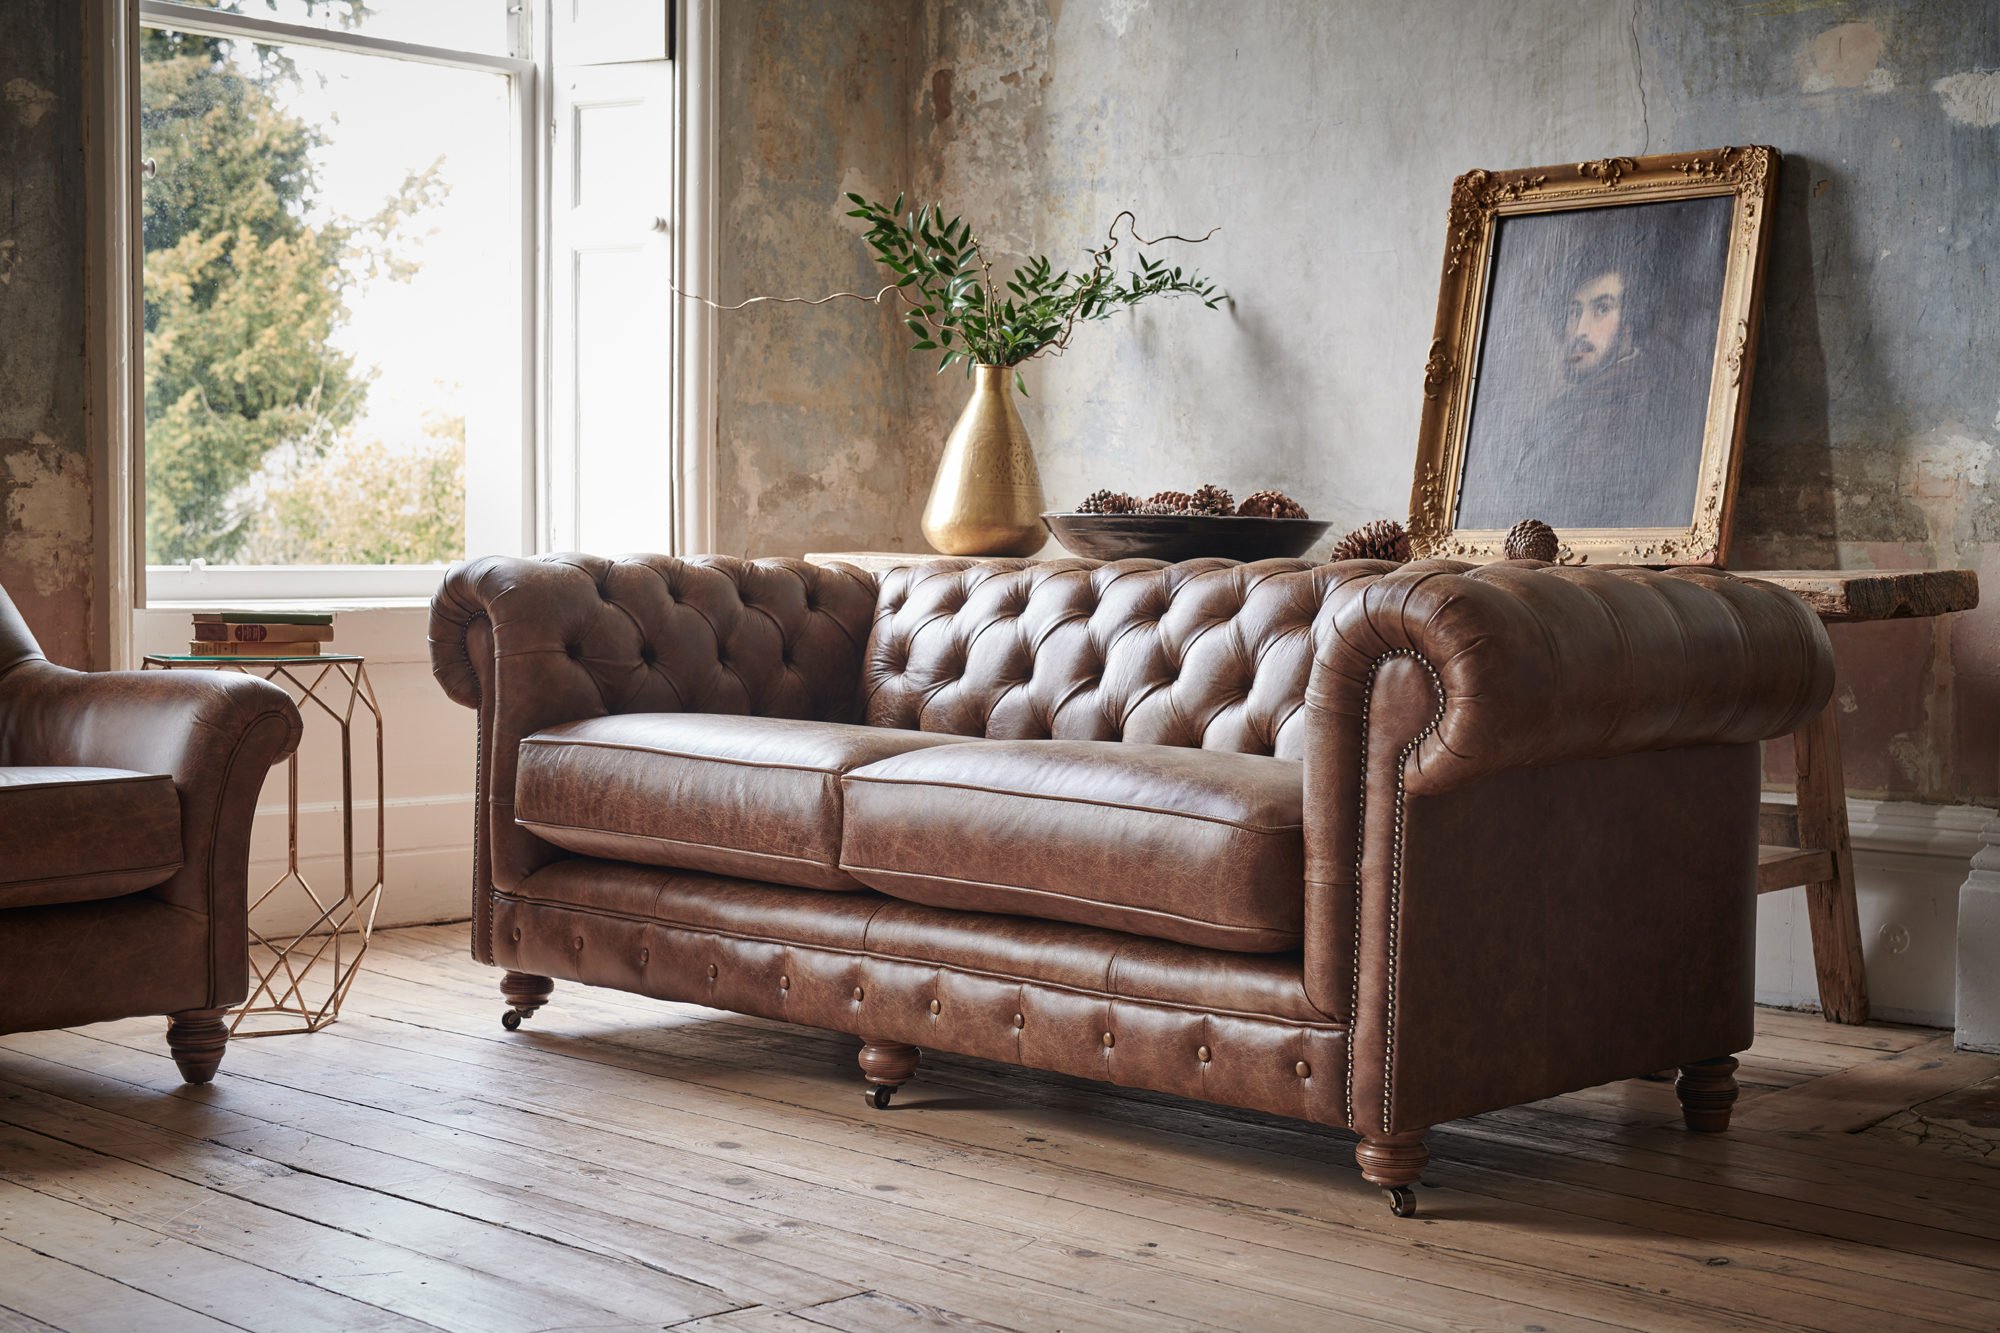 Chesterfield Leather Sofa, Styles Of Chesterfield Sofas